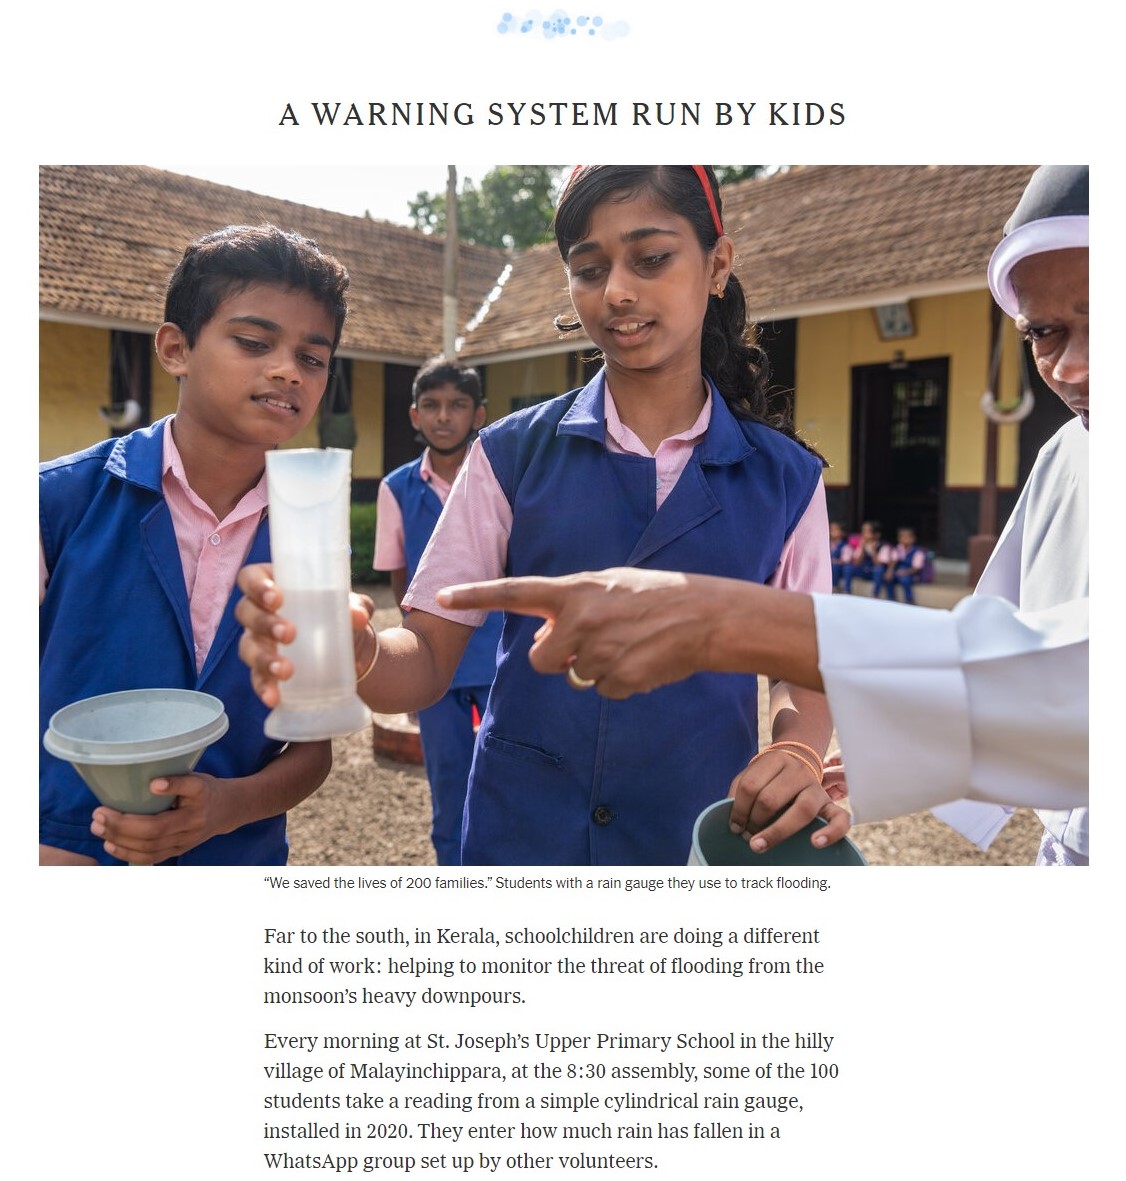 Monsoon Climate Monitoring and Warning through Schools and Colleges featured in The New York Times